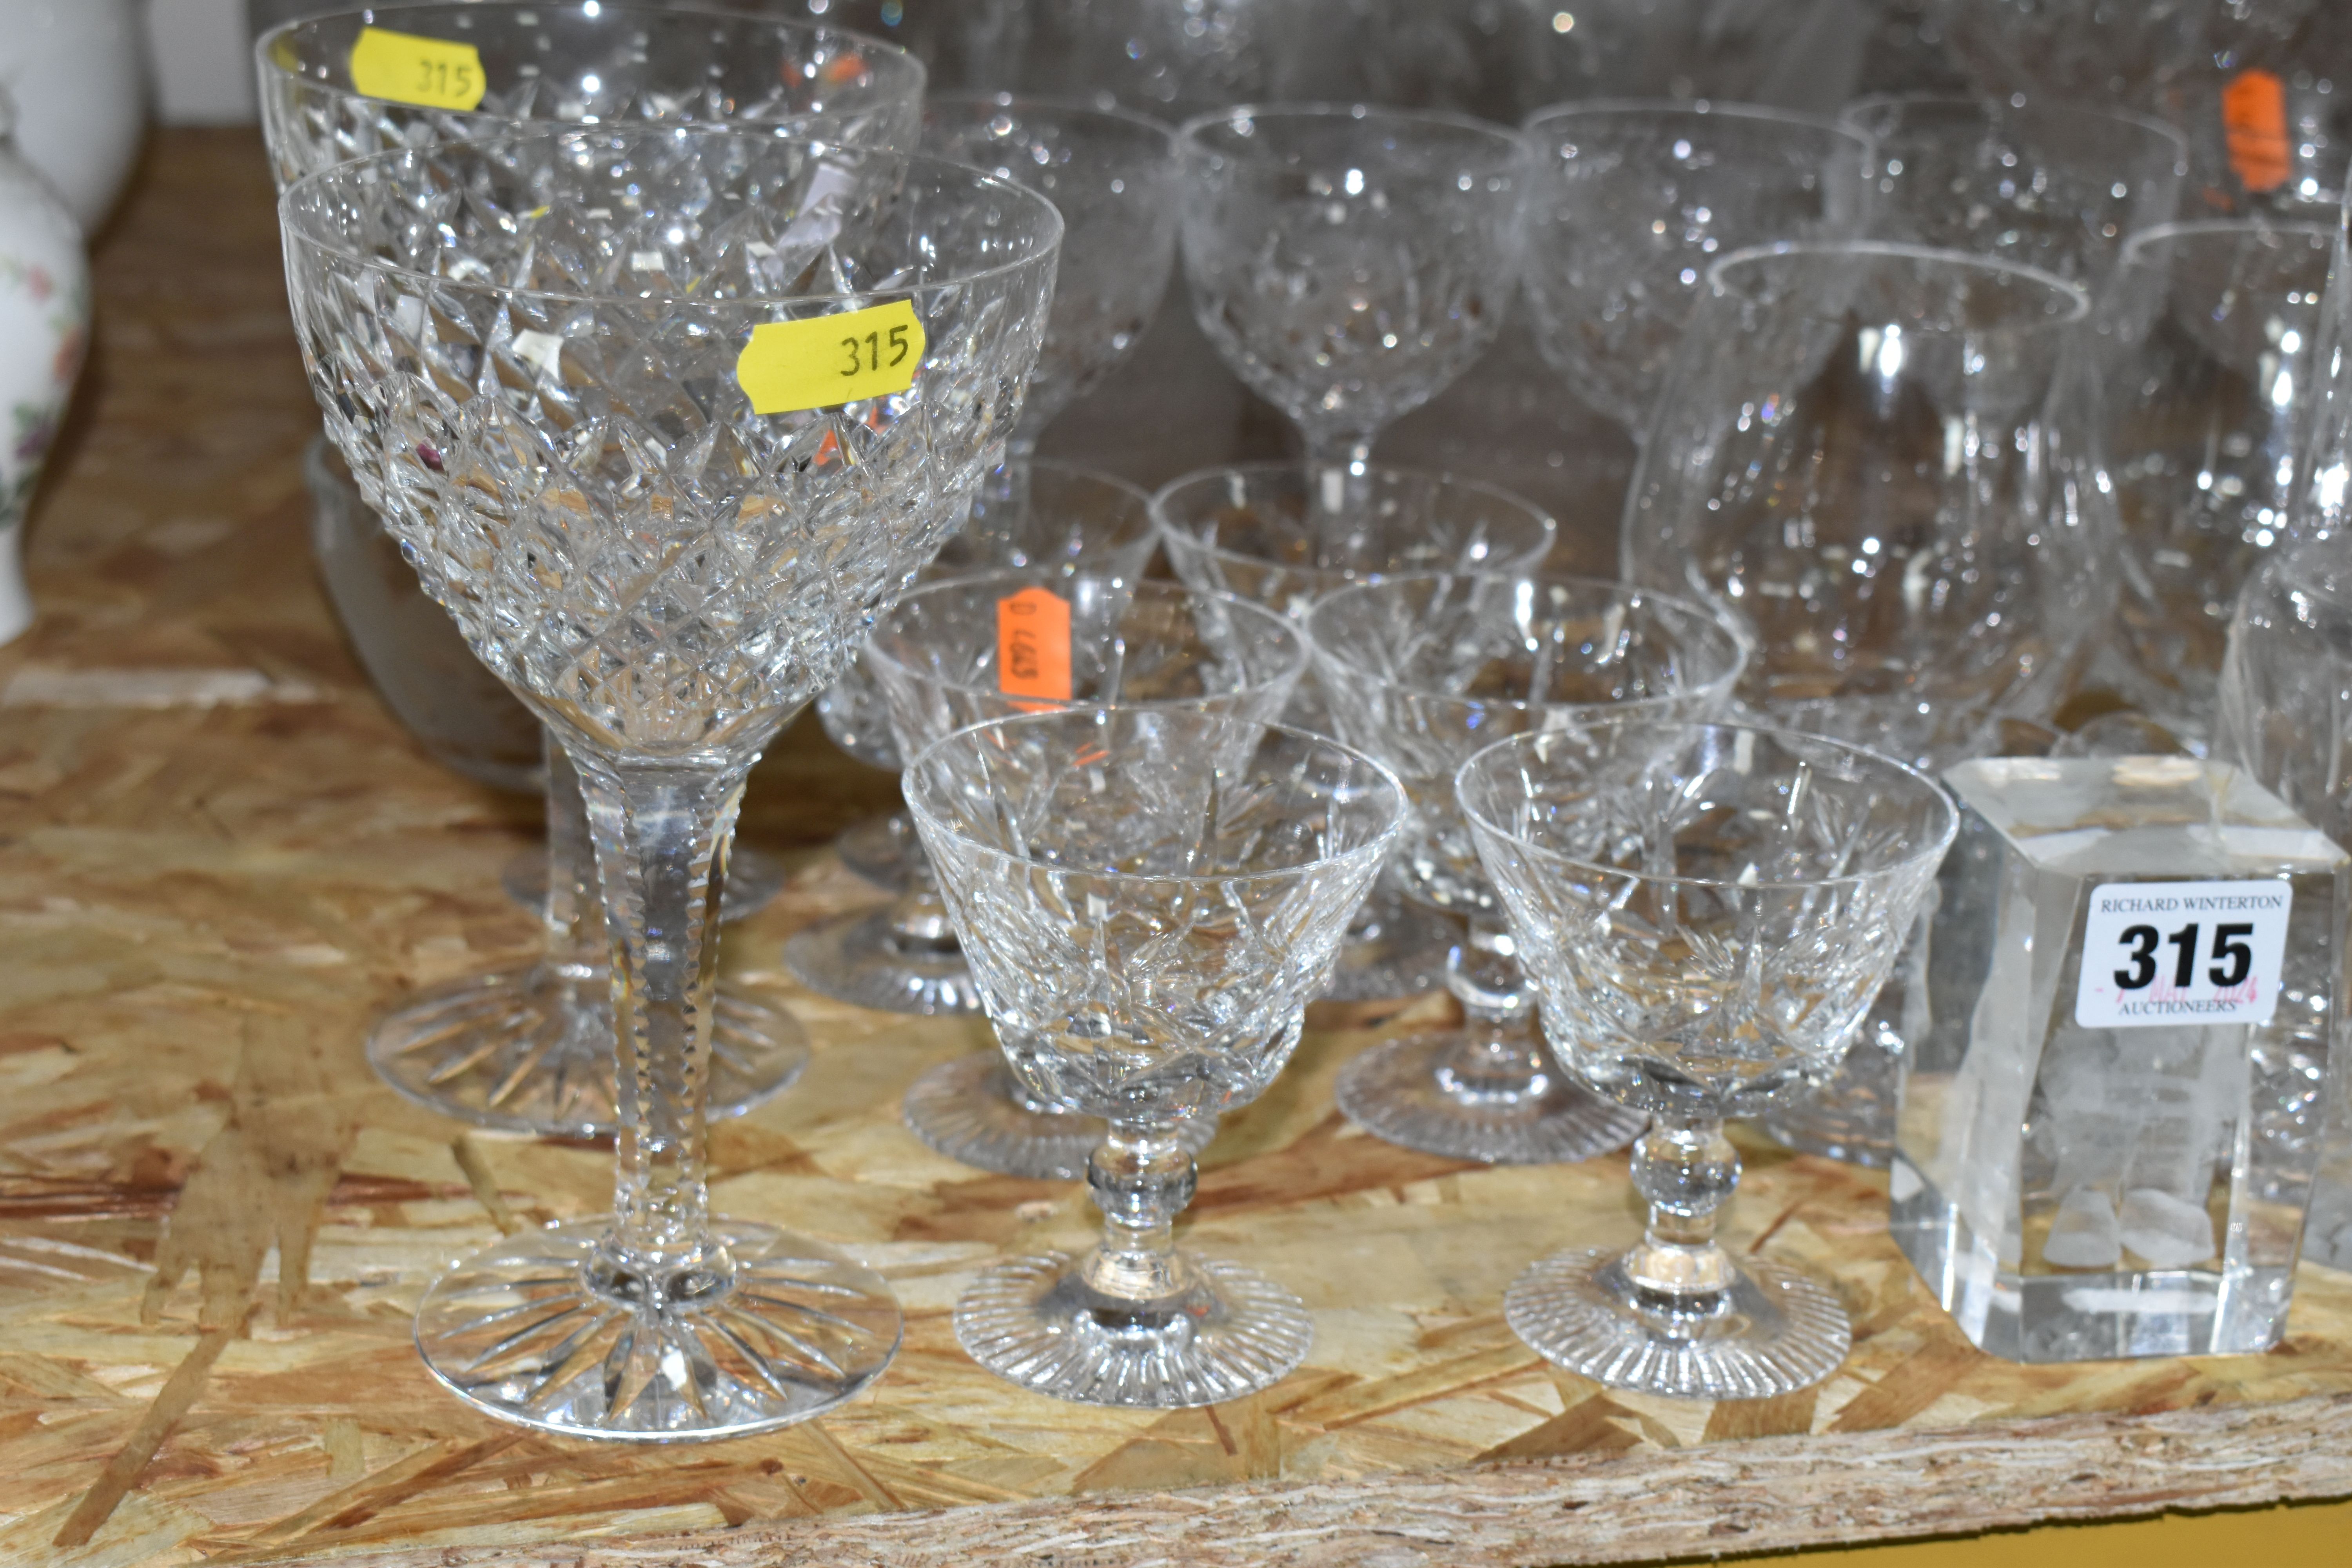 A QUANTITY OF CUT CRYSTAL AND GLASSWARE, maker's names include Royal Brierly, Stuart Crystal, - Image 2 of 6